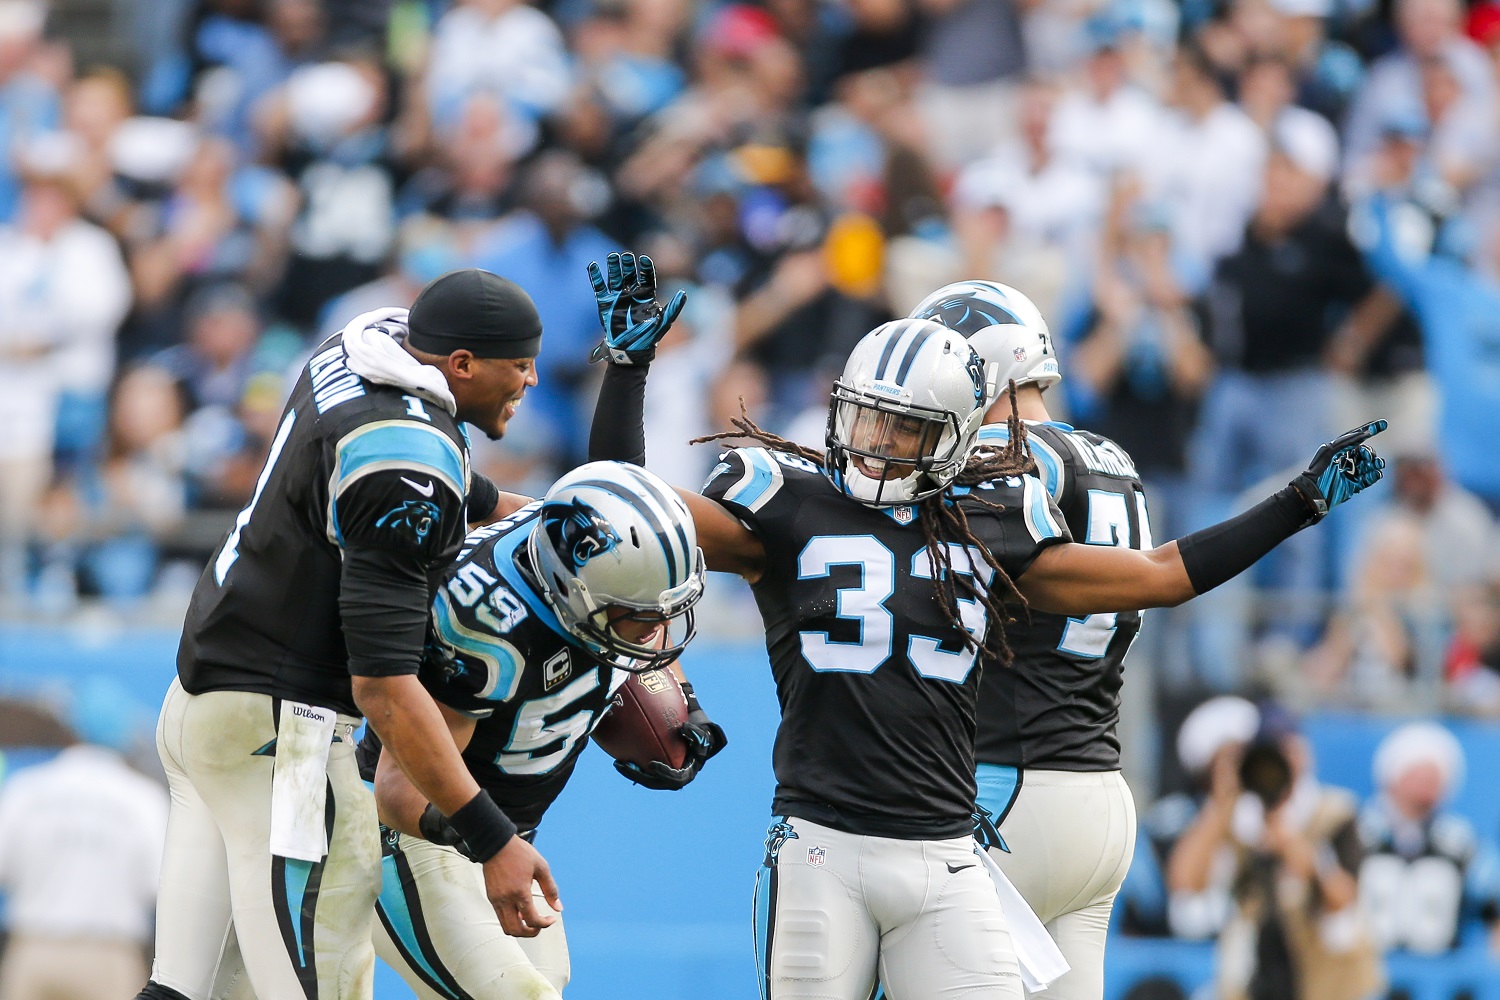 Carolina Panthers quarterback Cam Newton (1) celebrates with teammates middle linebacker Luke Kuechly (59) and free safety Tre Boston (33) after a interception against the Atlanta Falcons during an NFL football game at Bank of America Stadium in Charlotte, N.C. on Sunday, Dec. 13, 2015. (Chris Keane/AP Images for Panini)